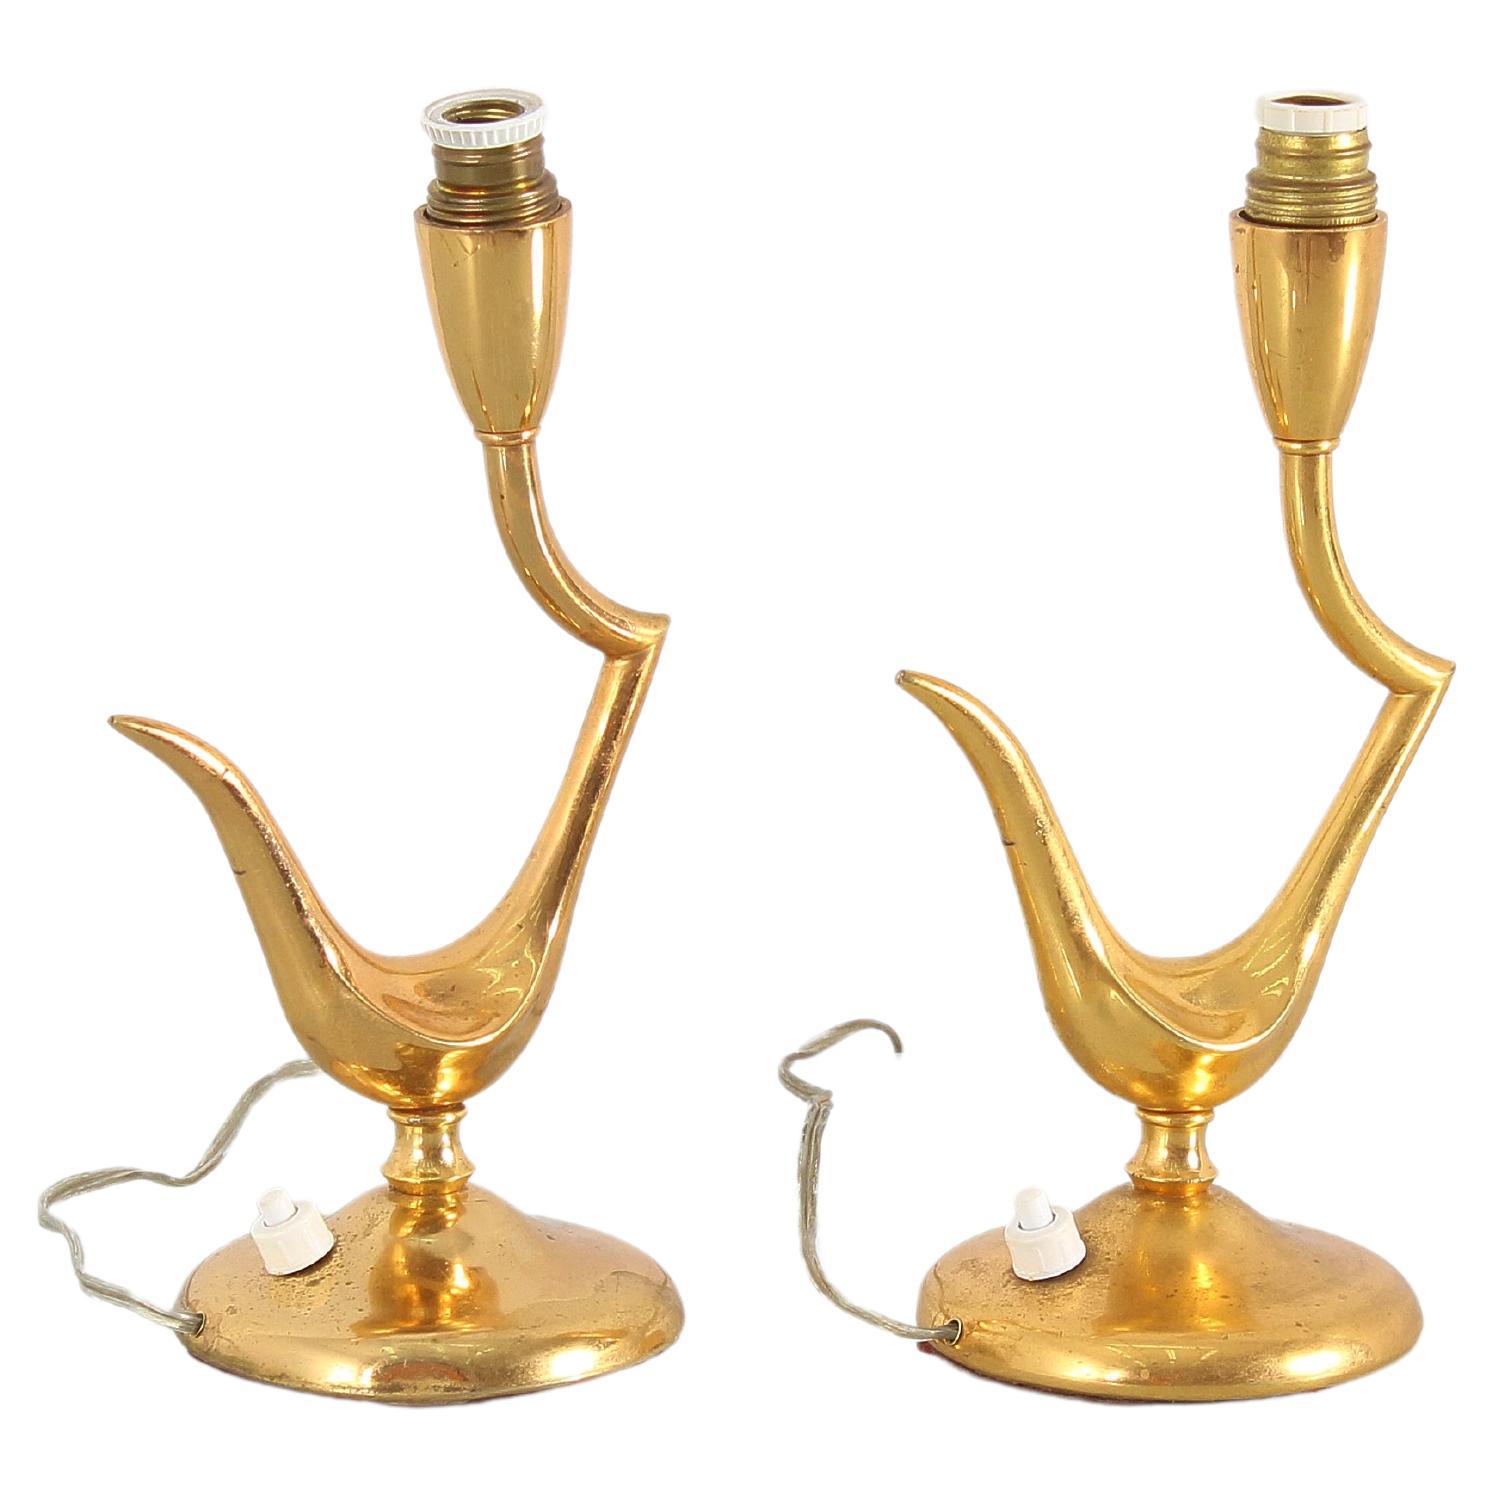 Pair of refined table lamps in full gilded brass with a beautiful and delightful curvilinear design. On / off button on the base. Attributed to Guglielmo Ulrich, 1940s, Italy. Any irregularity in the symmetry does not affect their value.
Wear